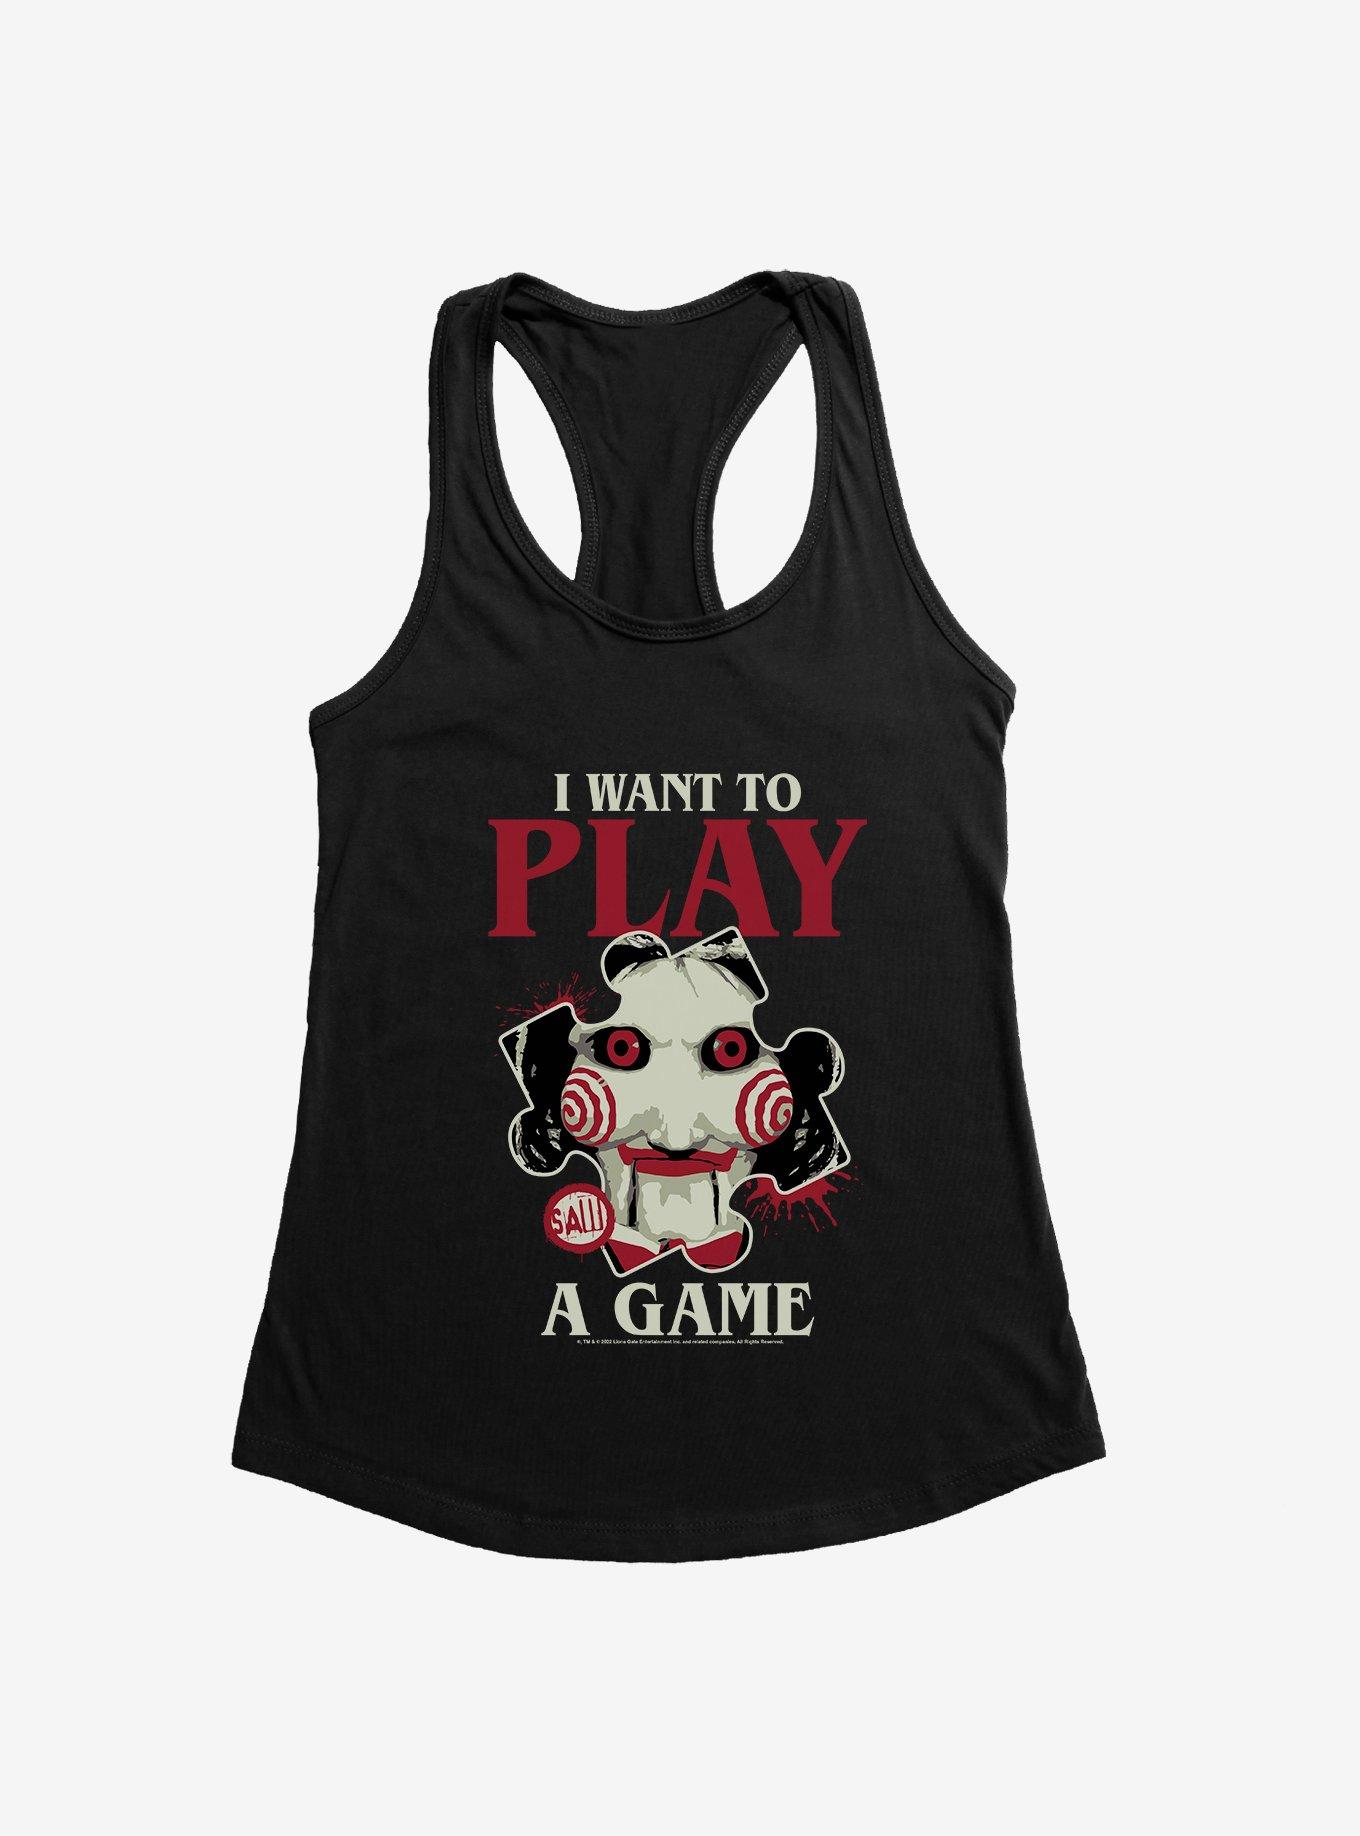 Saw I Want To Play A Game Girls Tank, BLACK, hi-res